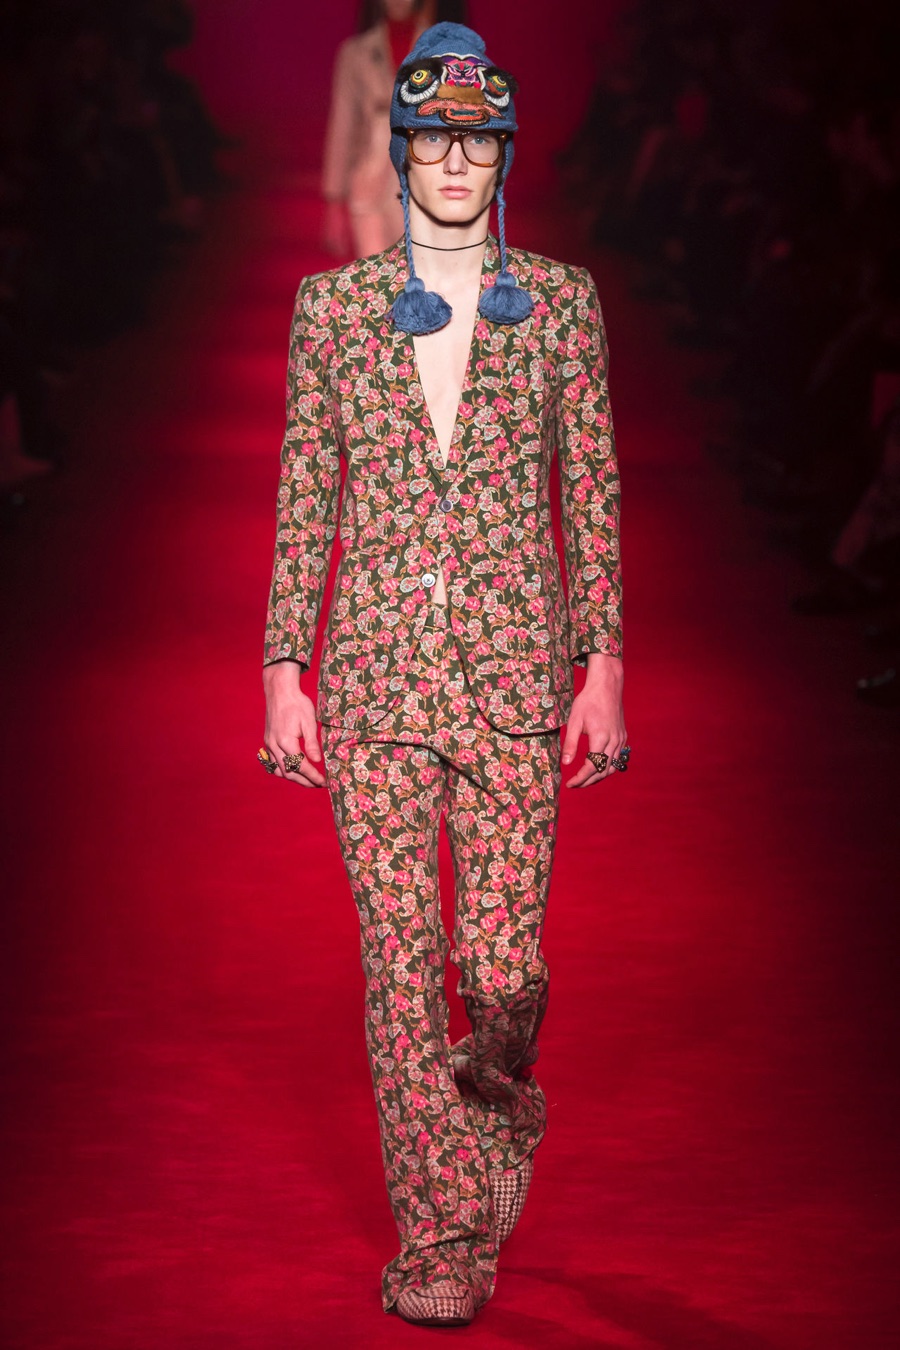 Gucci Goes Co-ed for Fashion Week – The Fashionisto